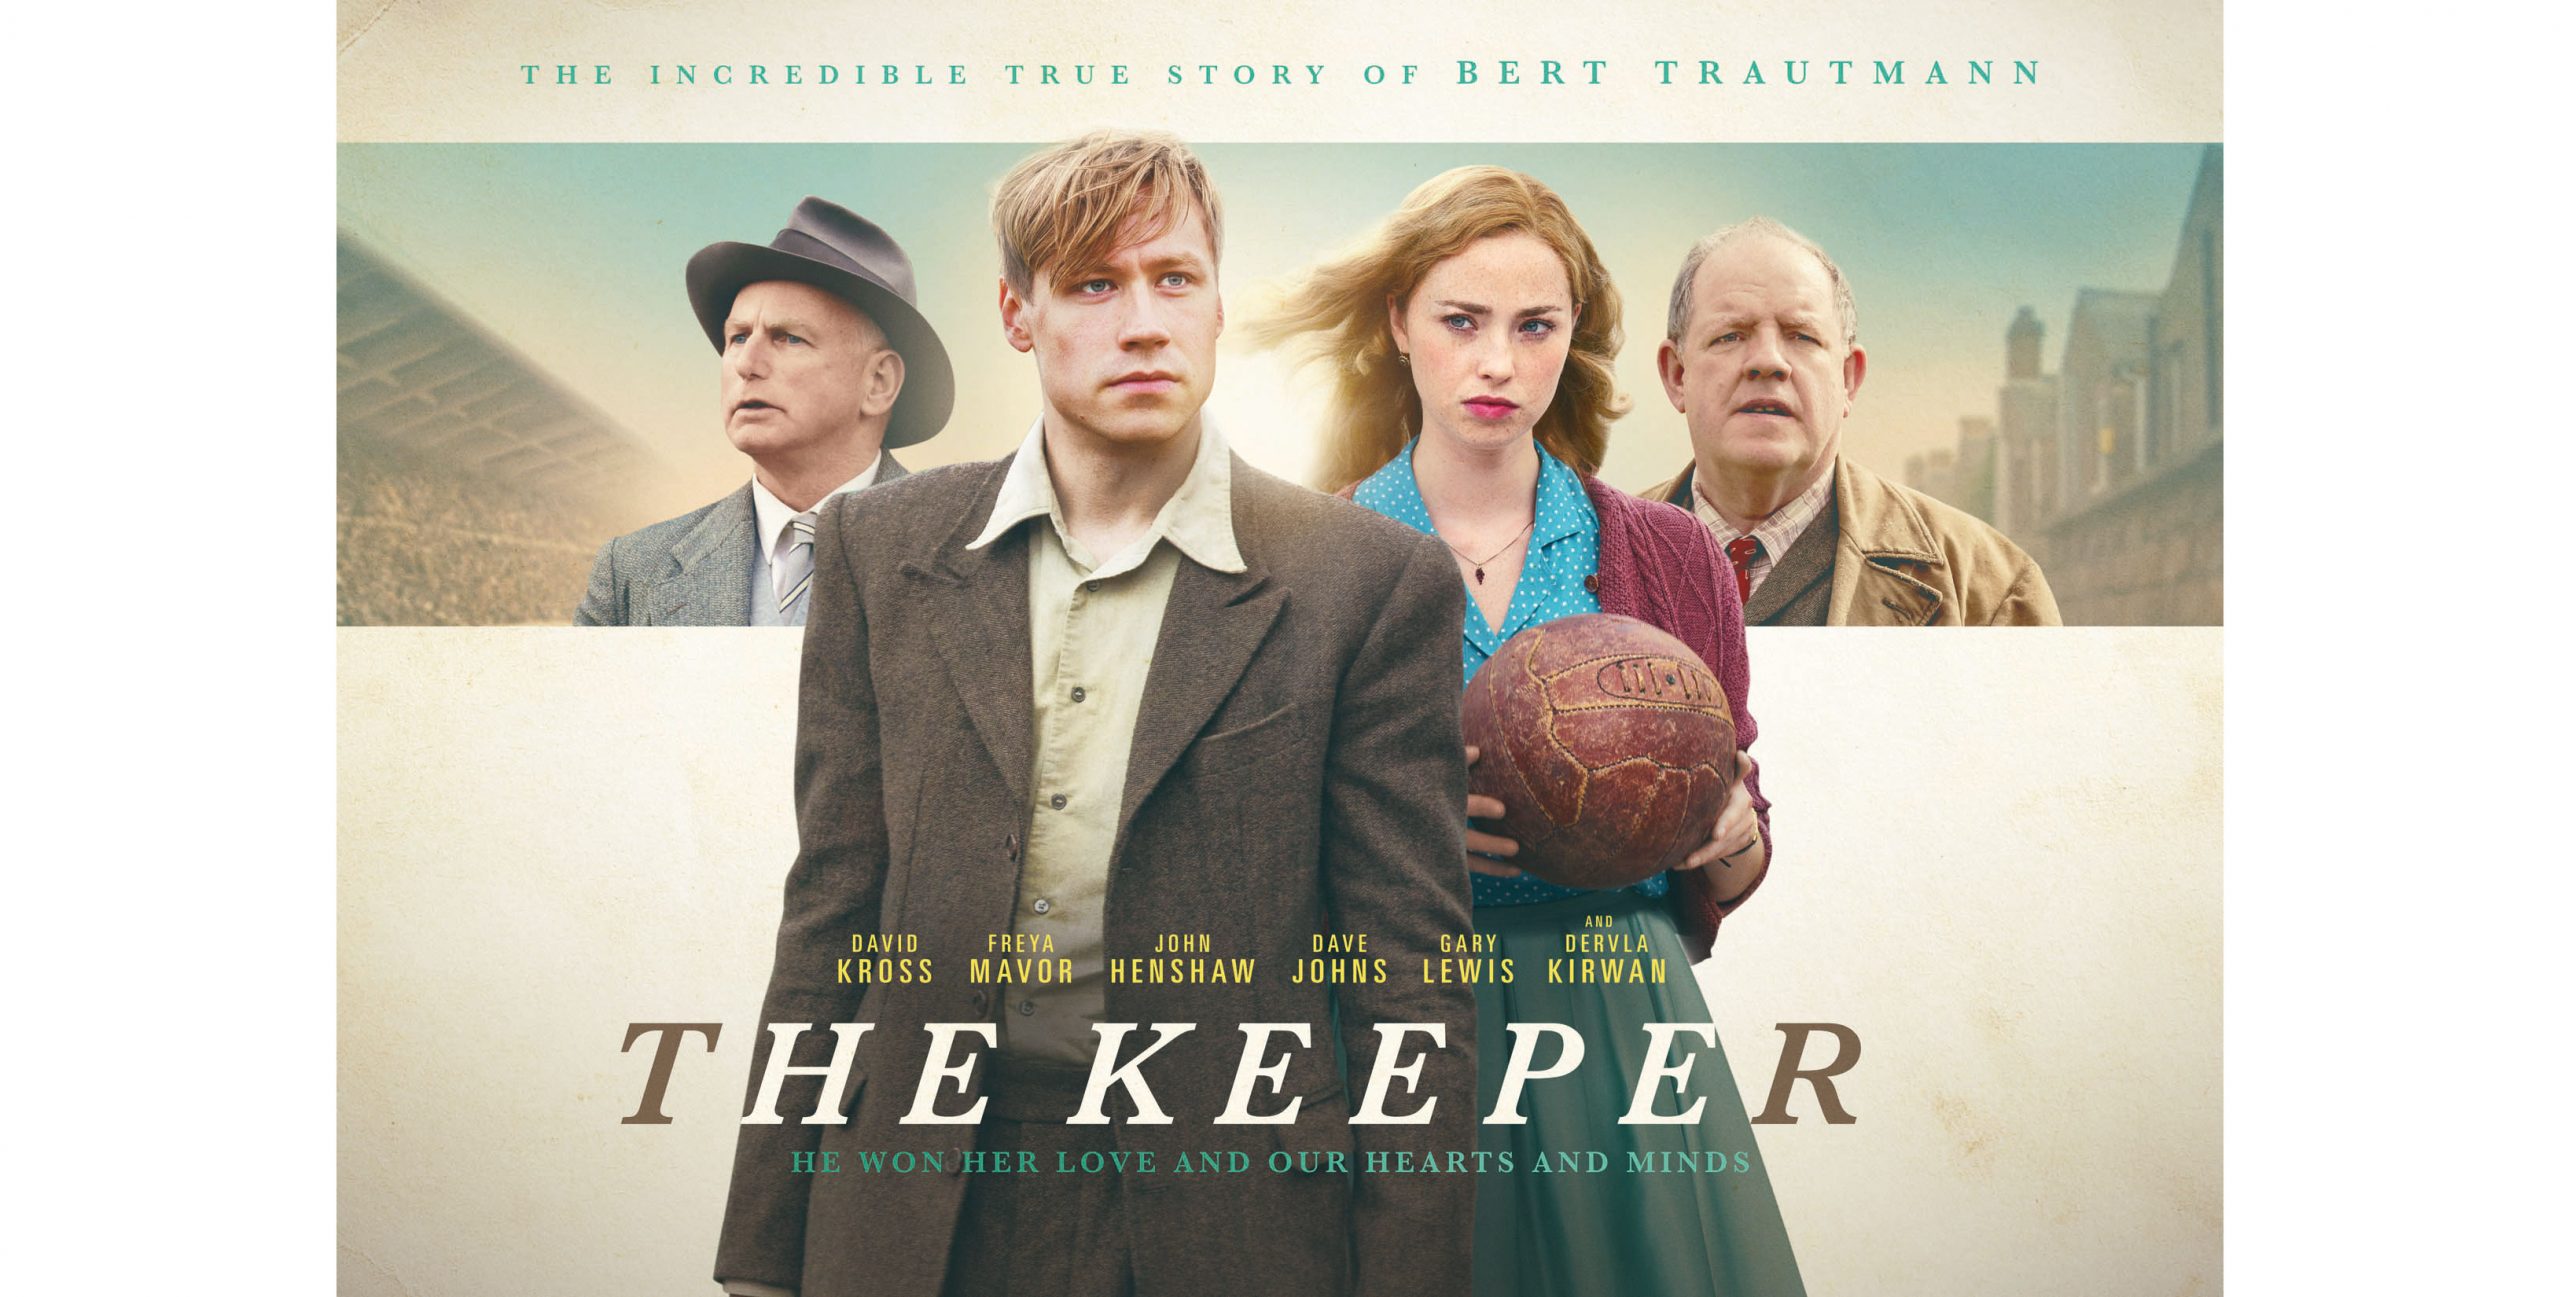 Gary Lewis in ‘The Keeper’